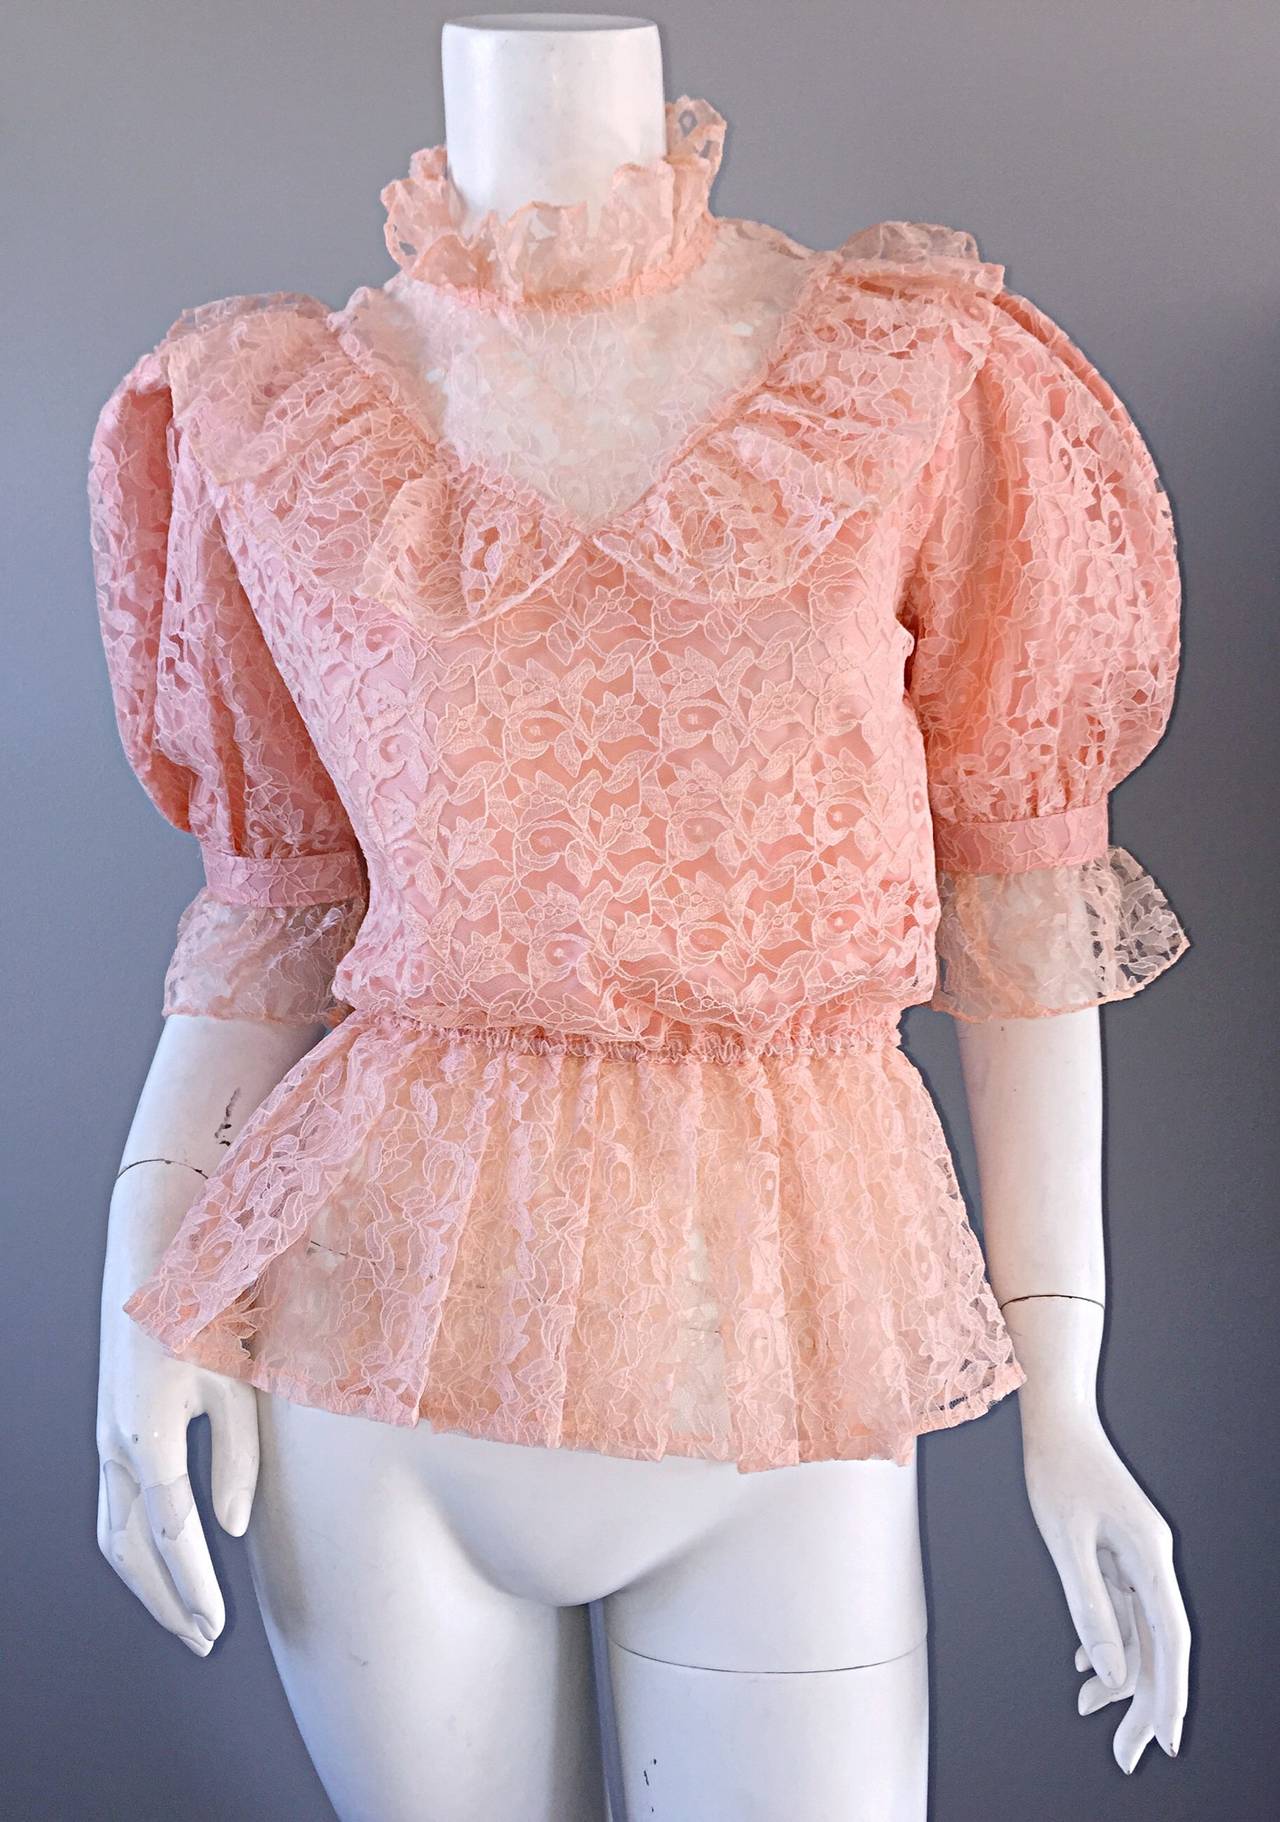 Cute 1970s 'Victorian Revival' pale pink lace blouse! High lace neck, with pearl buttons at back neck. Stylish 'puff sleeves.' Peplum hem, with an elastic waistband. Hook-and-eye at each sleeve cuff. Made extremely well, and very versatile. Looks